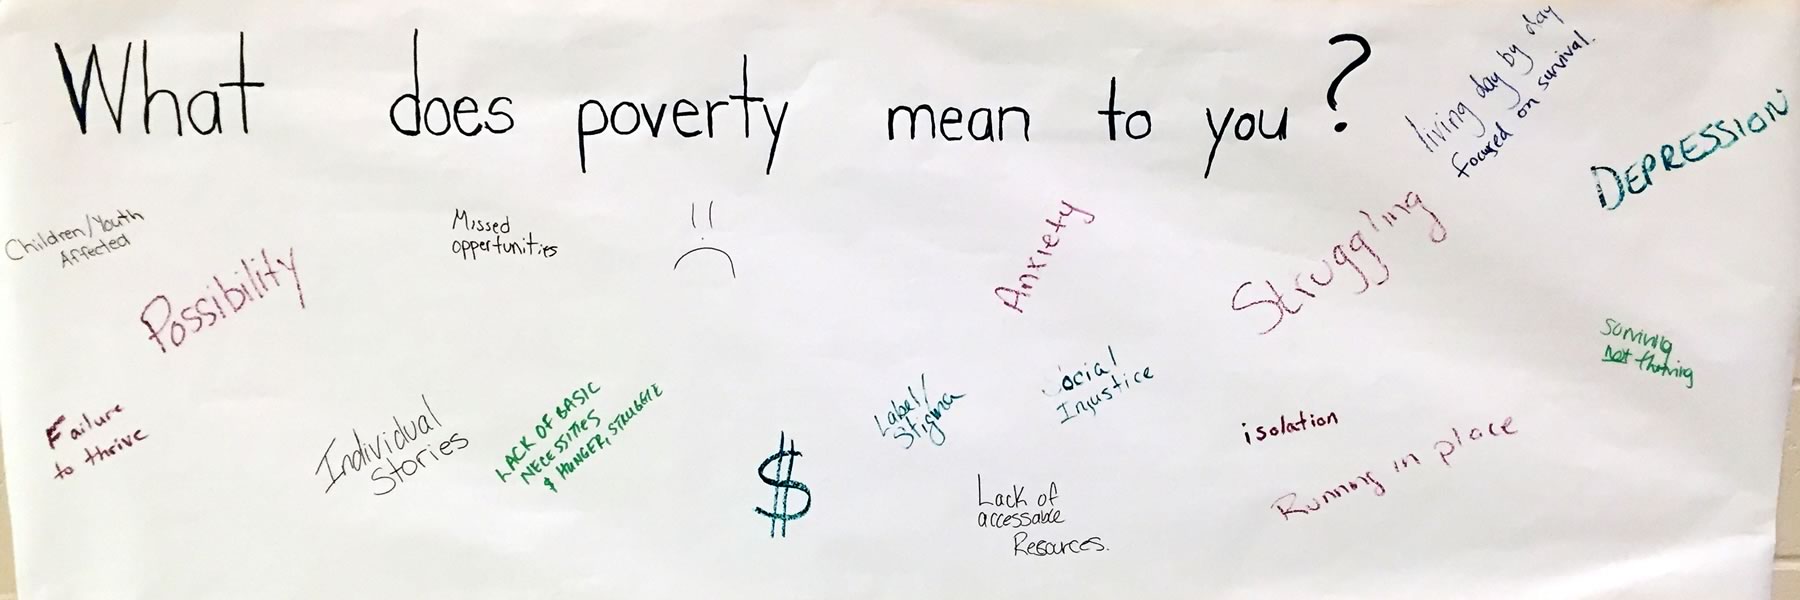 What Does Poverty Mean to You